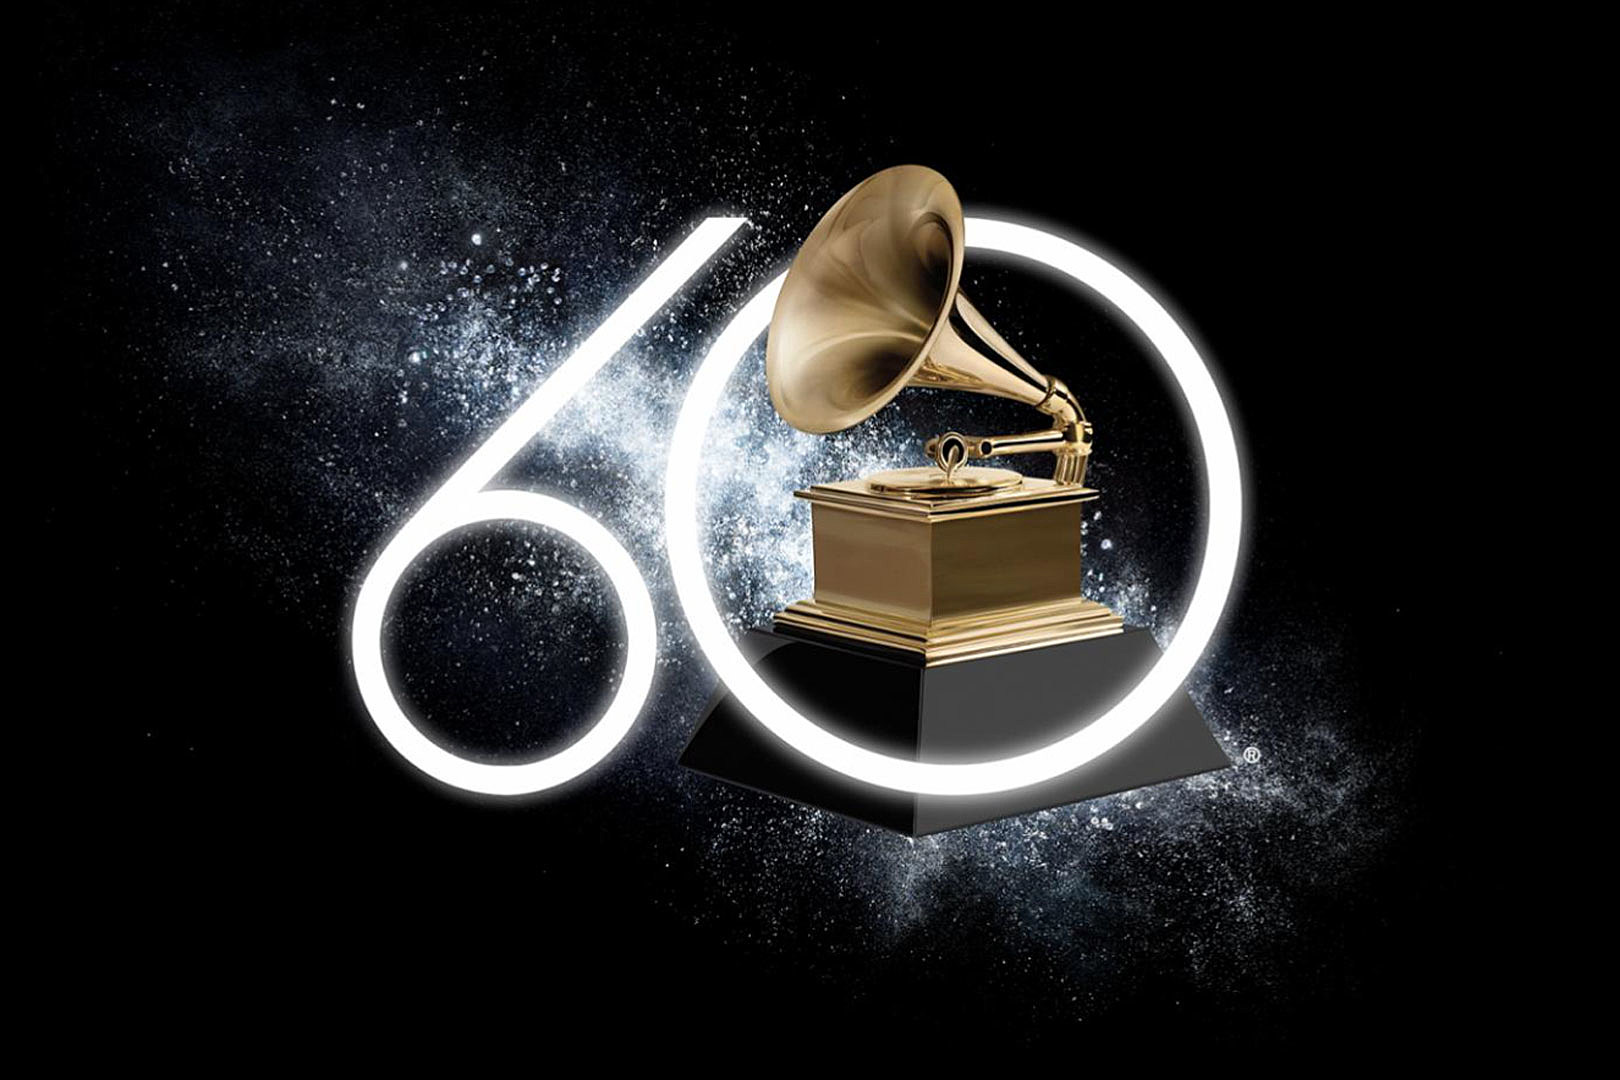 Opinion: Who Will Win the 60th Annual Grammys Rock + Metal Categories?